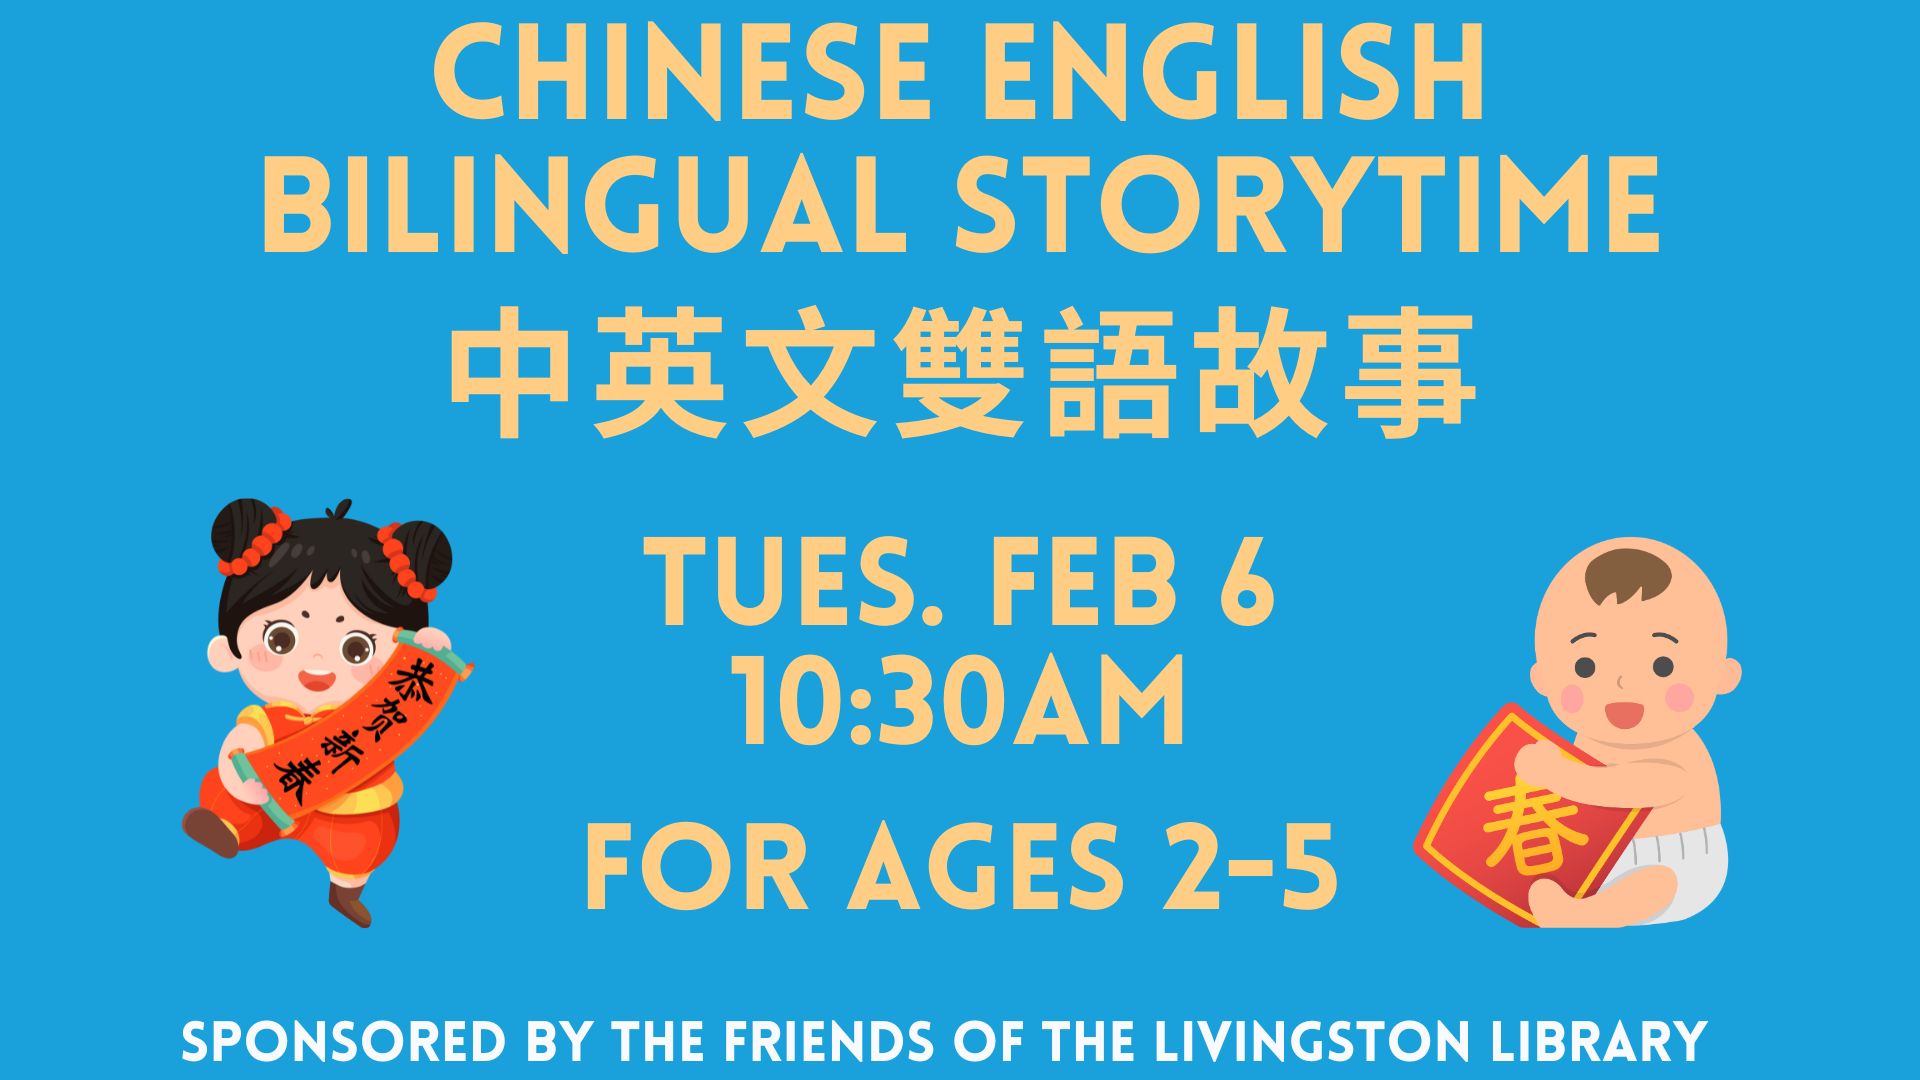 Chinese English Bilingual Storytime. 中英文雙語故事. Tues. Feb 6. 10:30am. For ages 2-5.